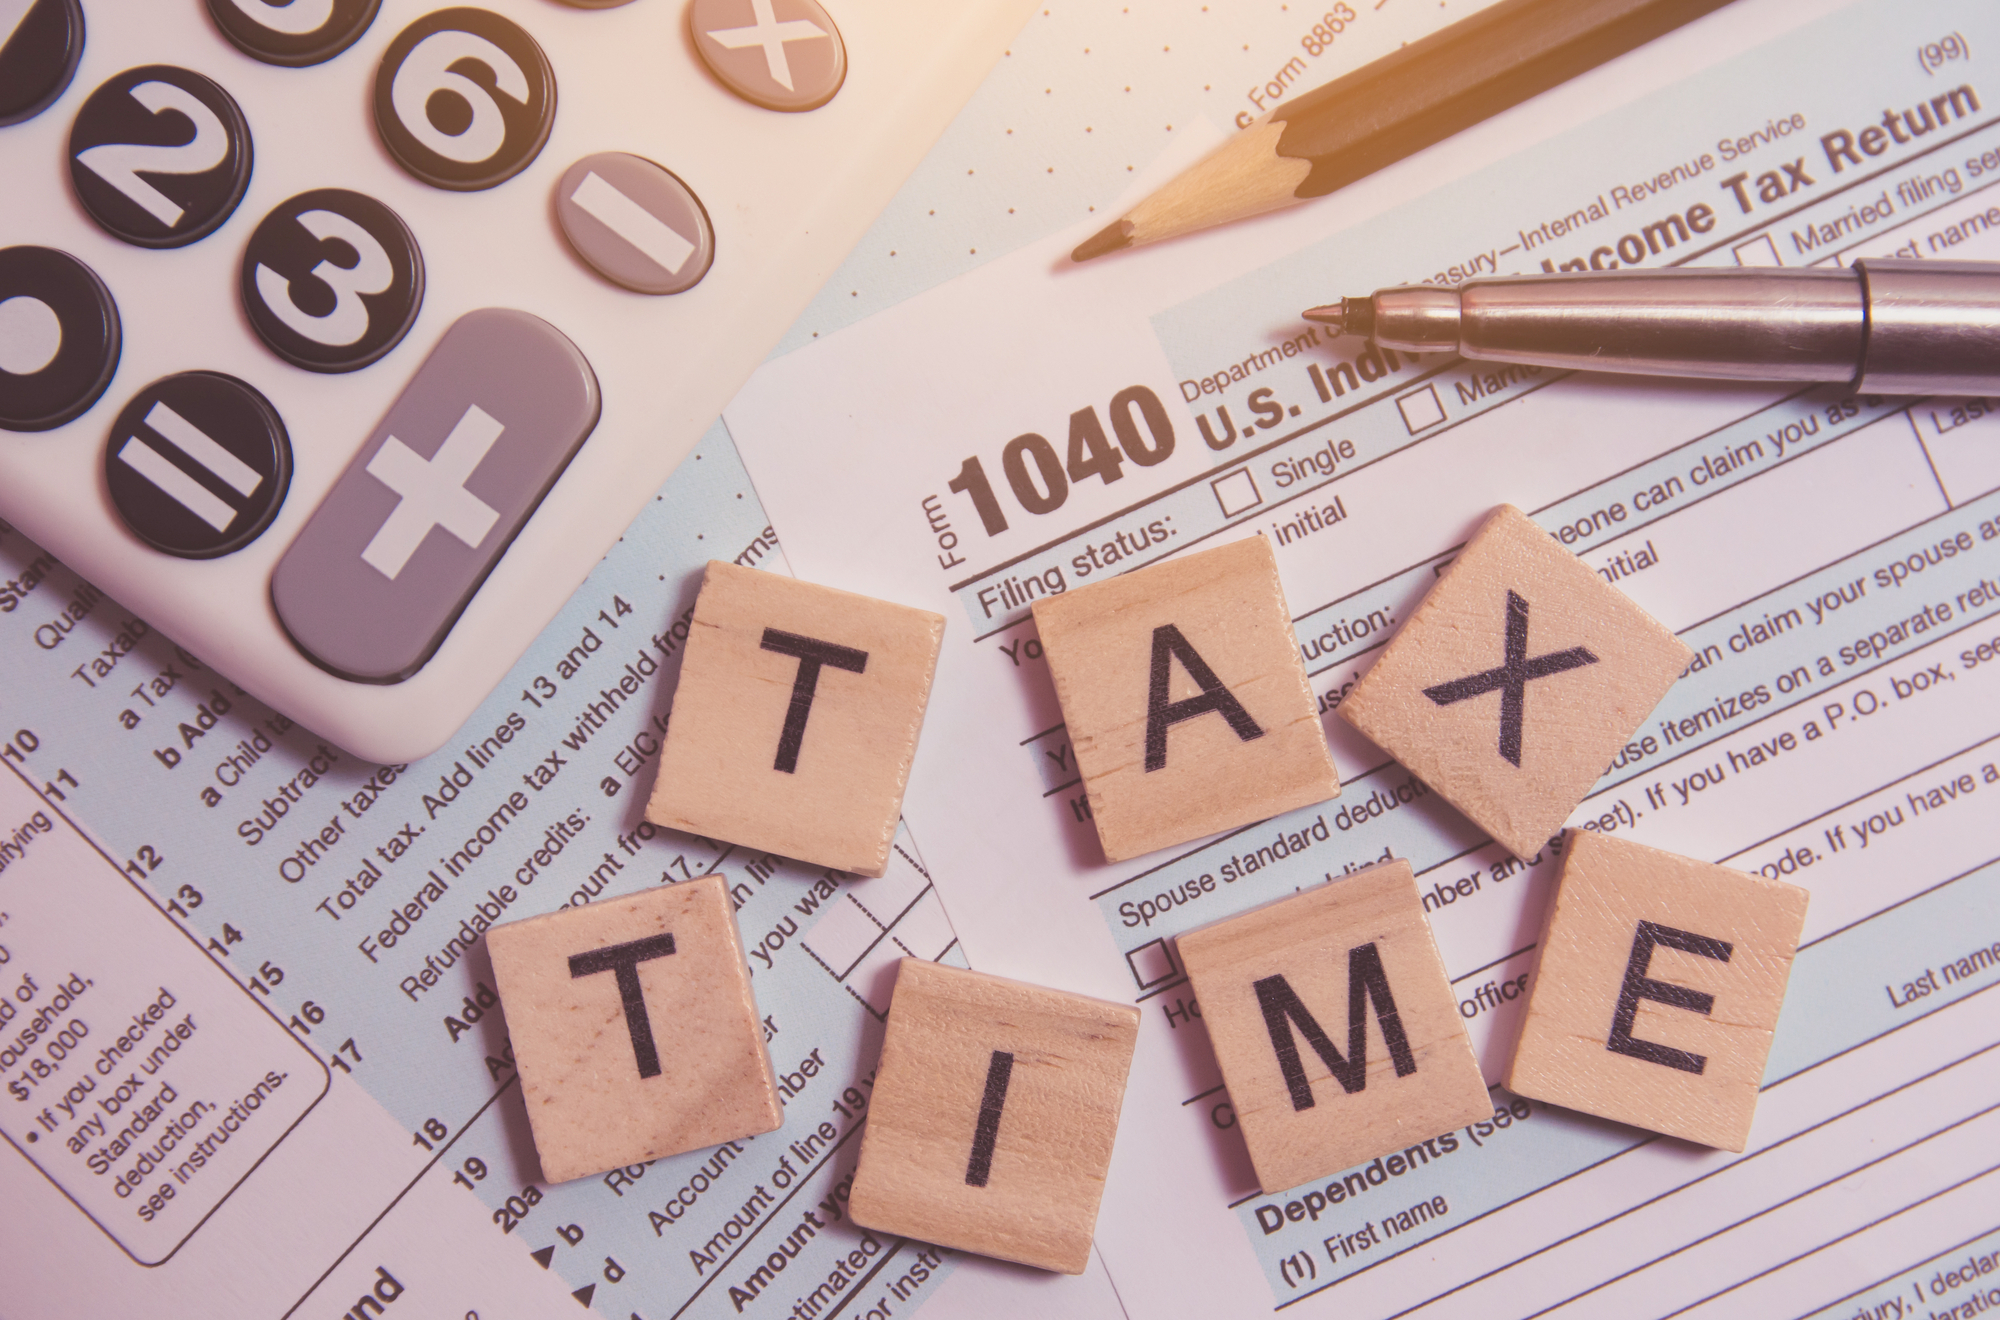 The 2023 Tax Deadline to File in the United States